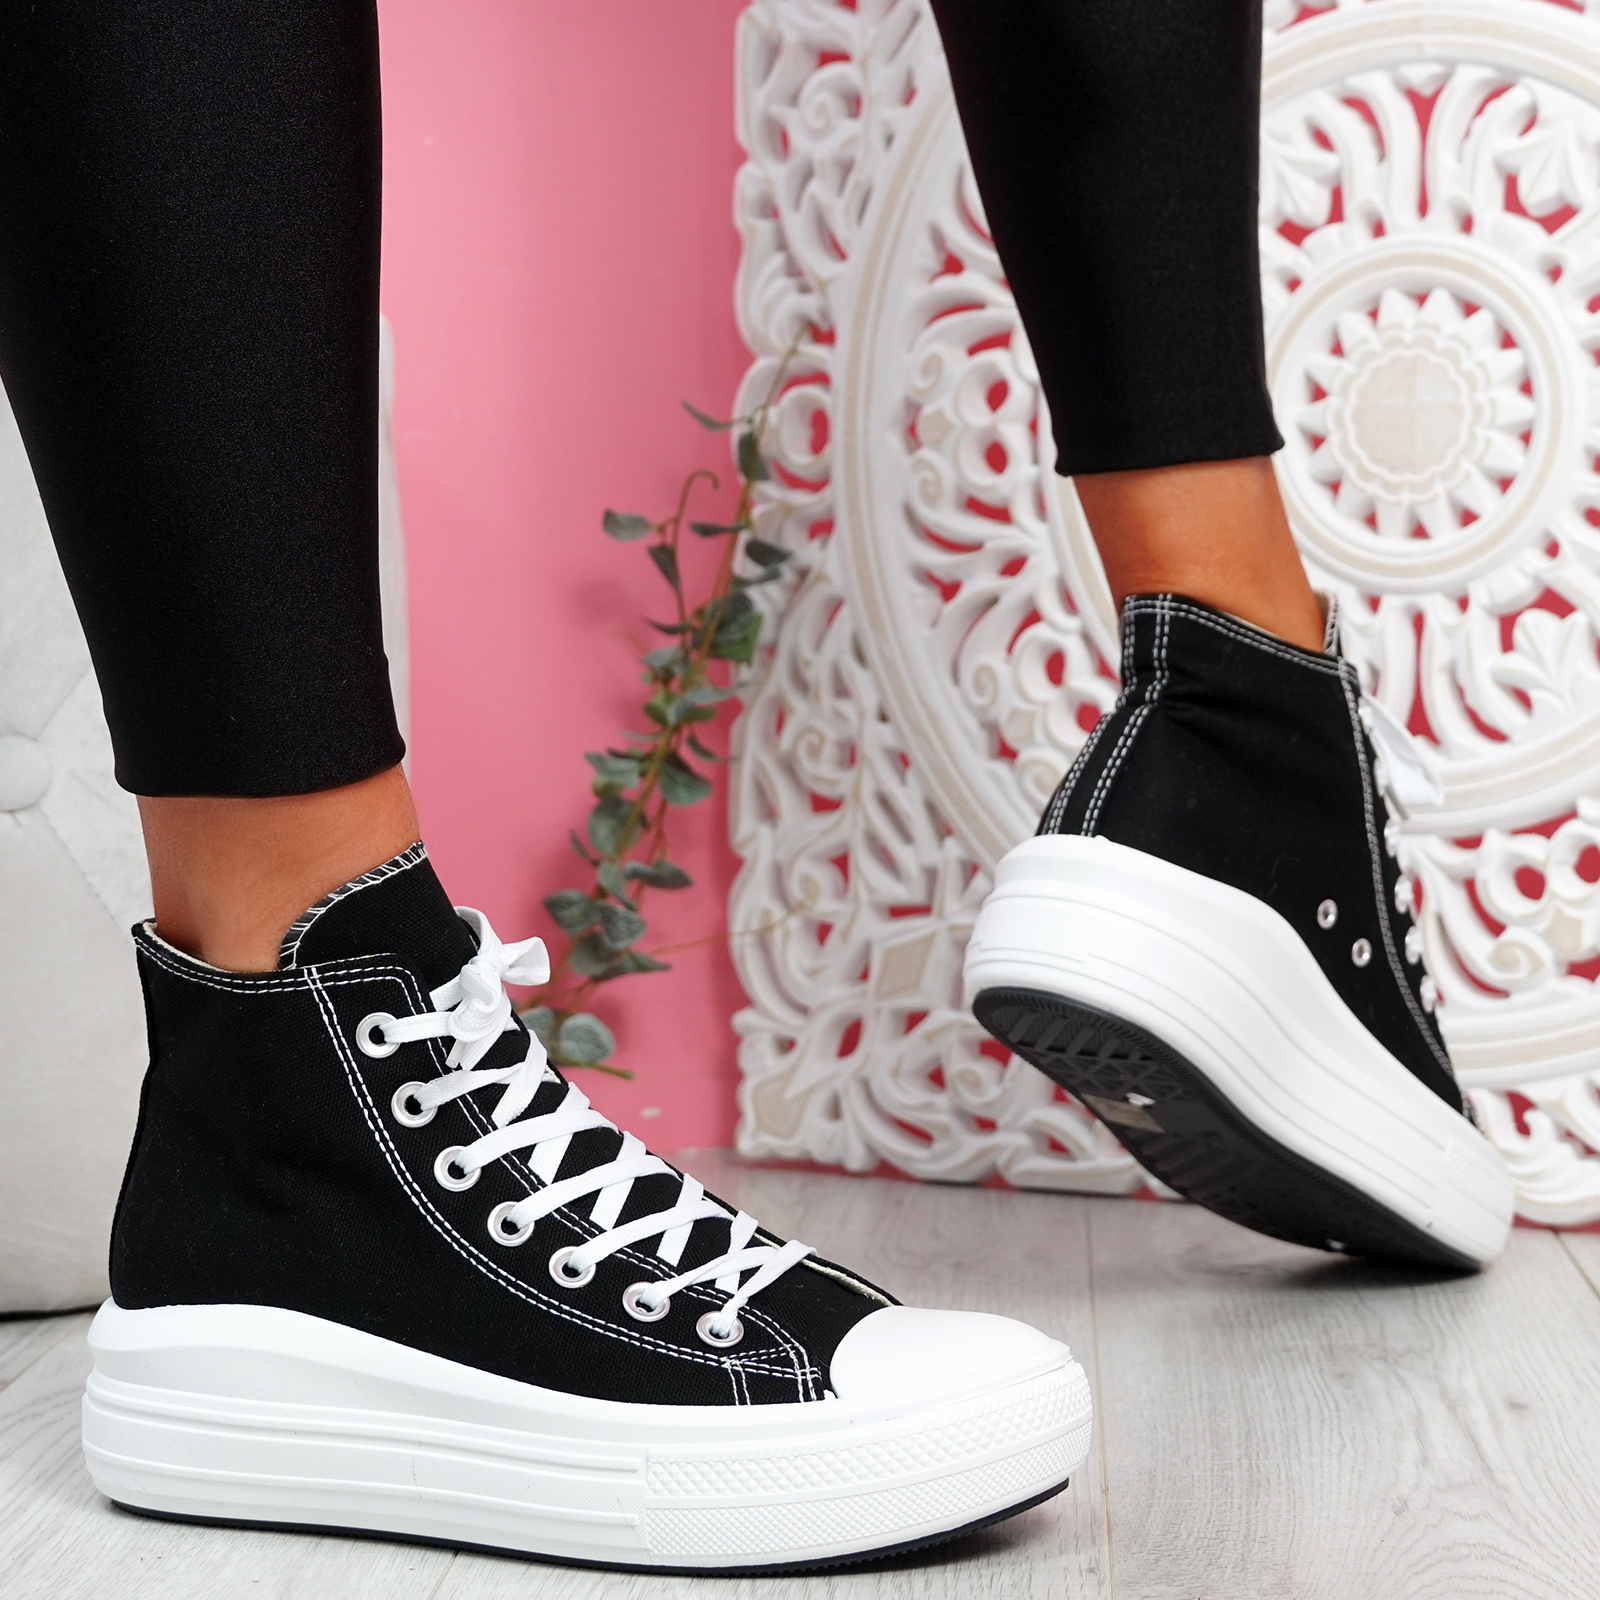 WOMENS LADIES HIGH TOP CHUNKY TRAINERS PLATFORM LACE UP SNEAKERS WOMEN SHOES